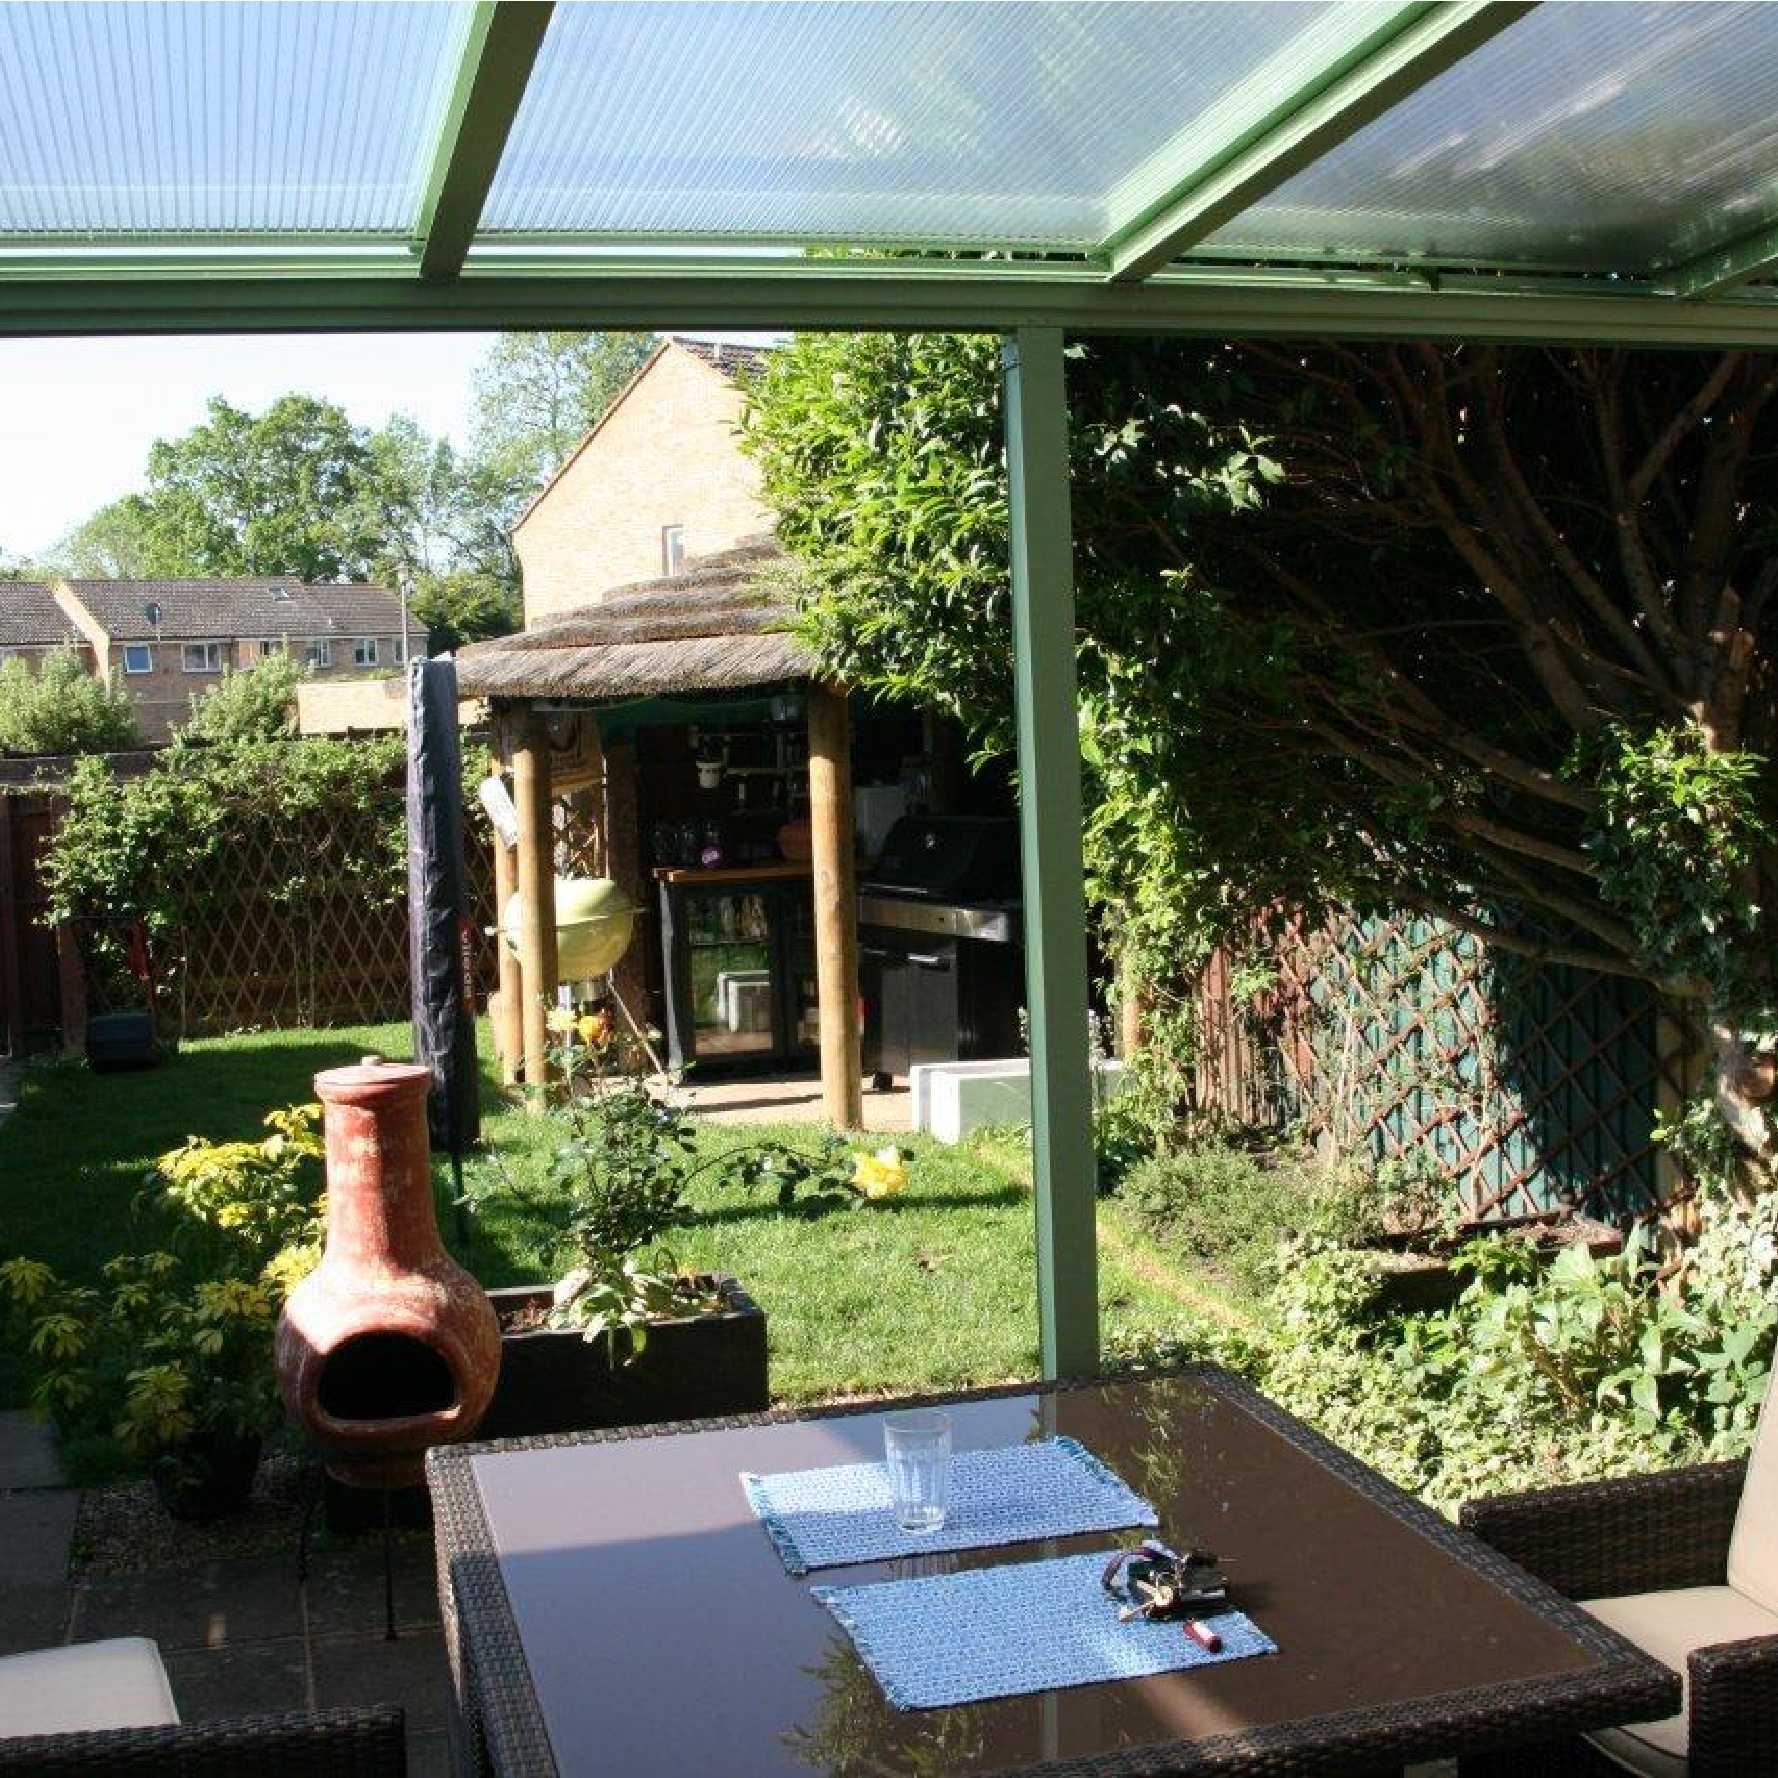 Affordable Omega Smart Lean-To Canopy, White with 16mm Polycarbonate Glazing - 11.4m (W) x 3.5m (P), (5) Supporting Posts